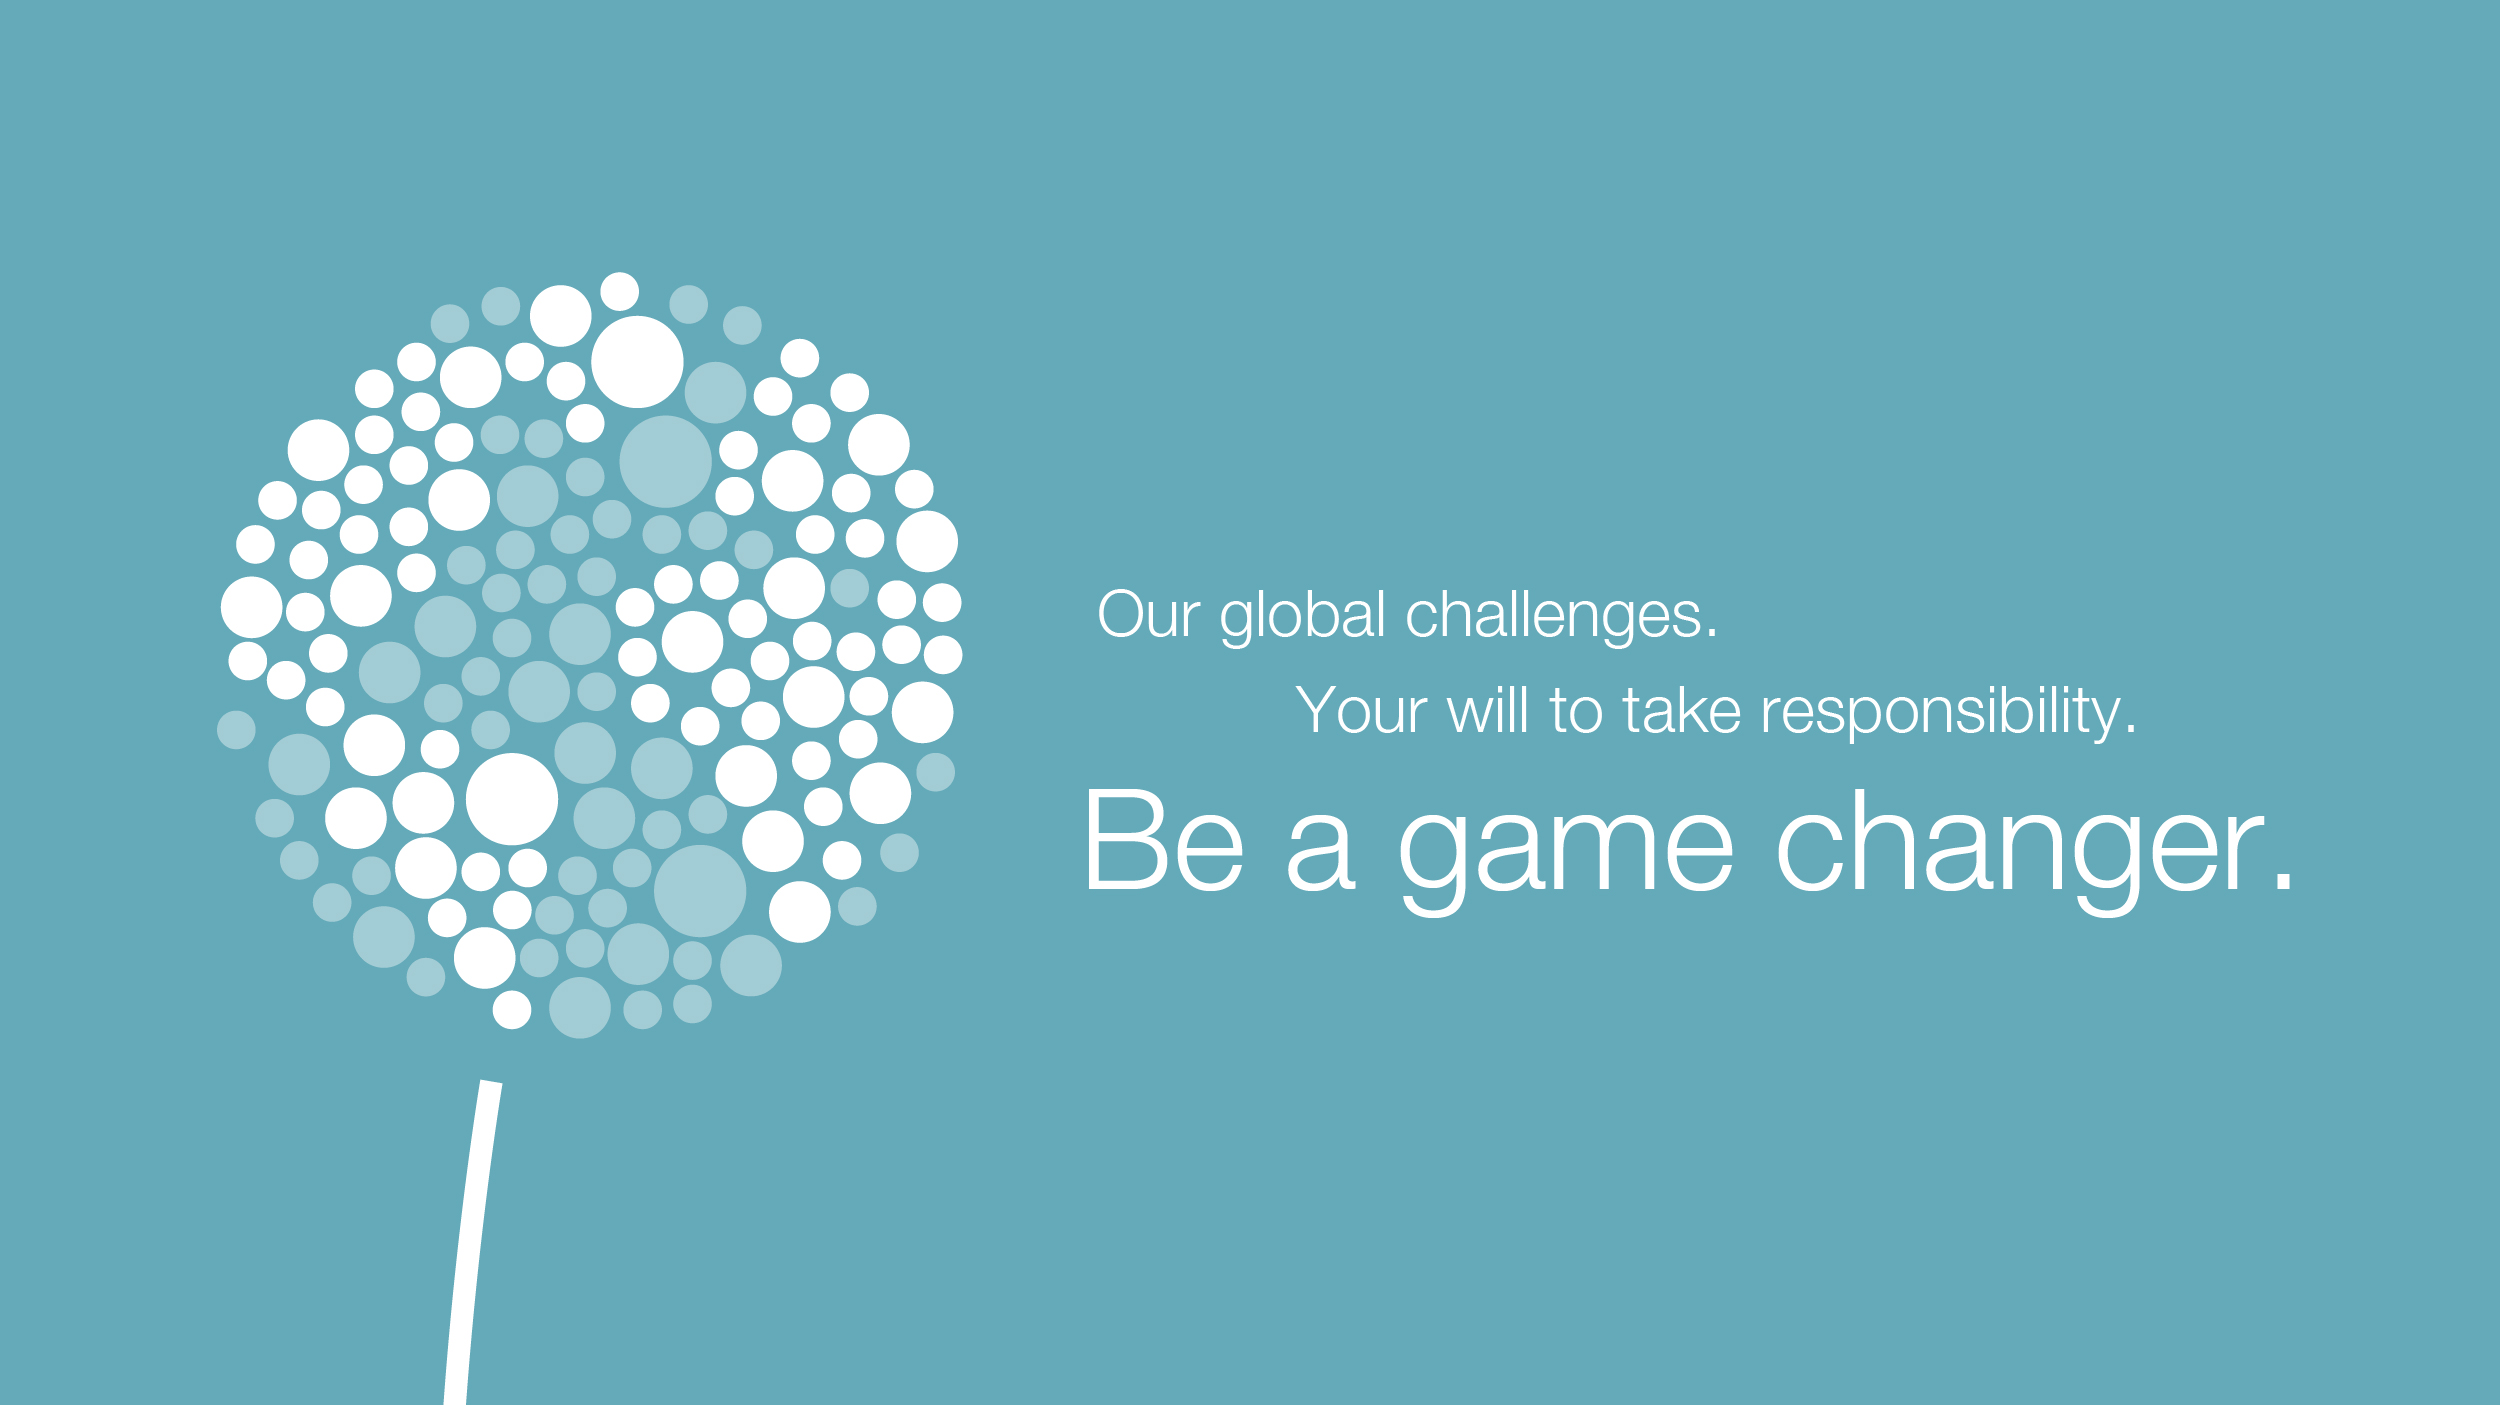 Pusteblume aus Icons als Weltkugel, daneben der Slogan: Our global challenges Your will to take responibility